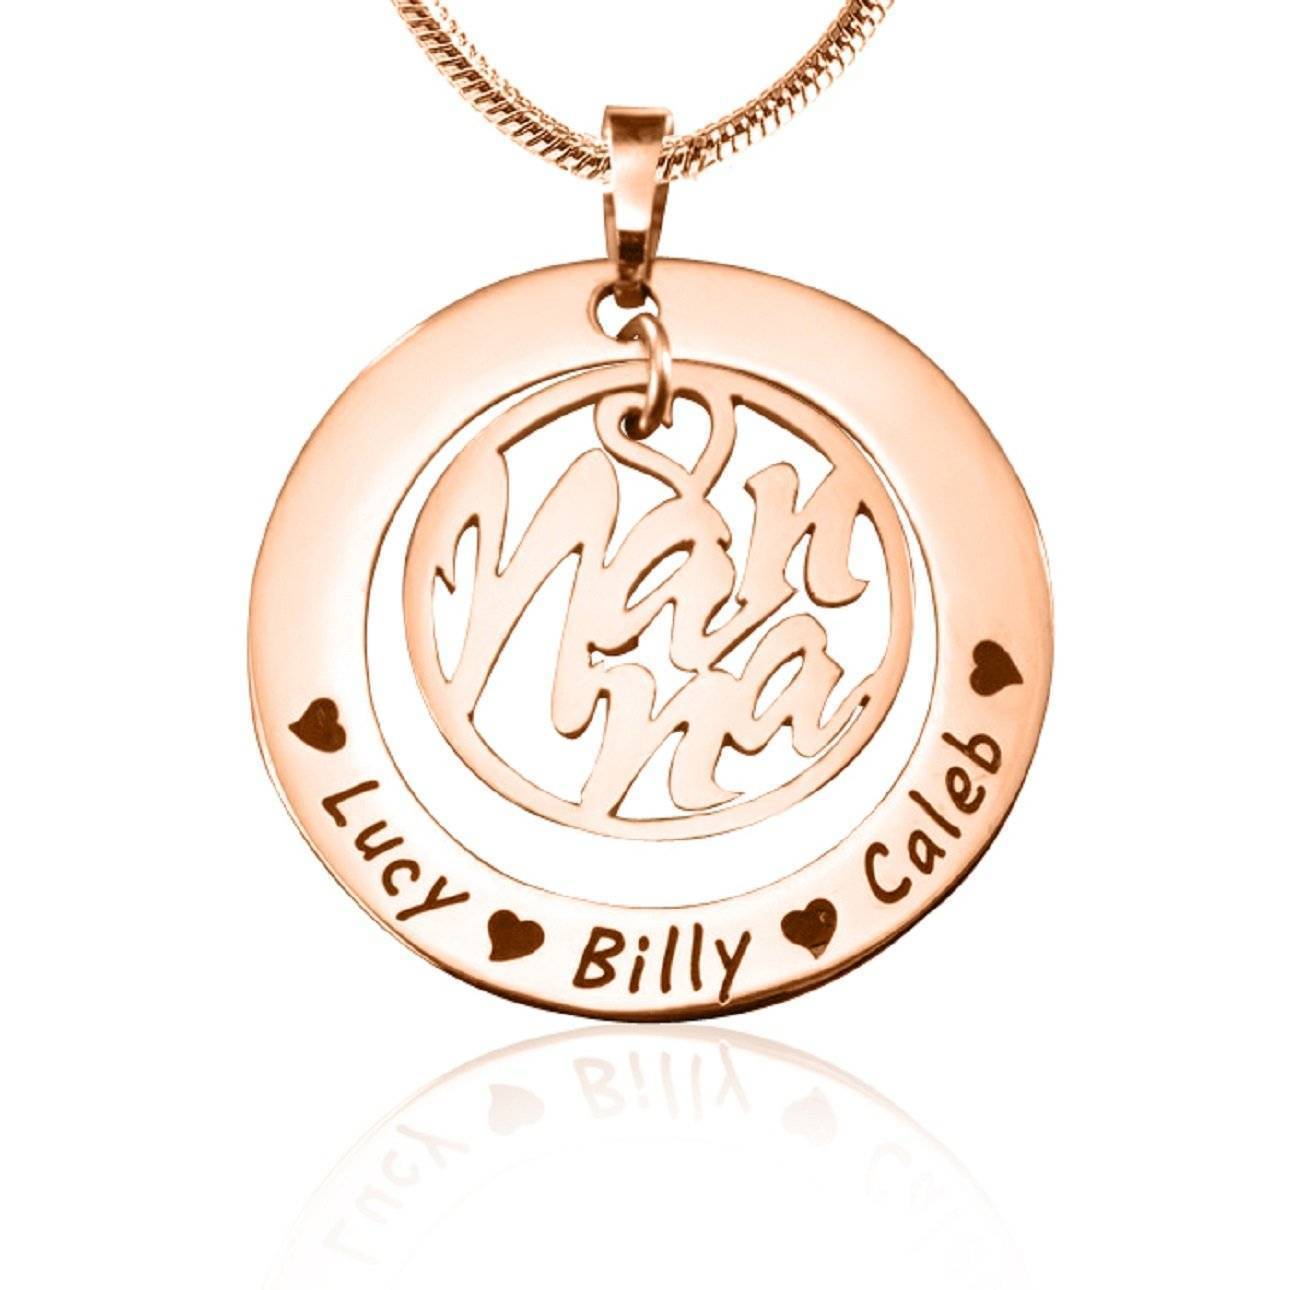 In My Life Necklace - Mothers Jewellery by Belle Fever